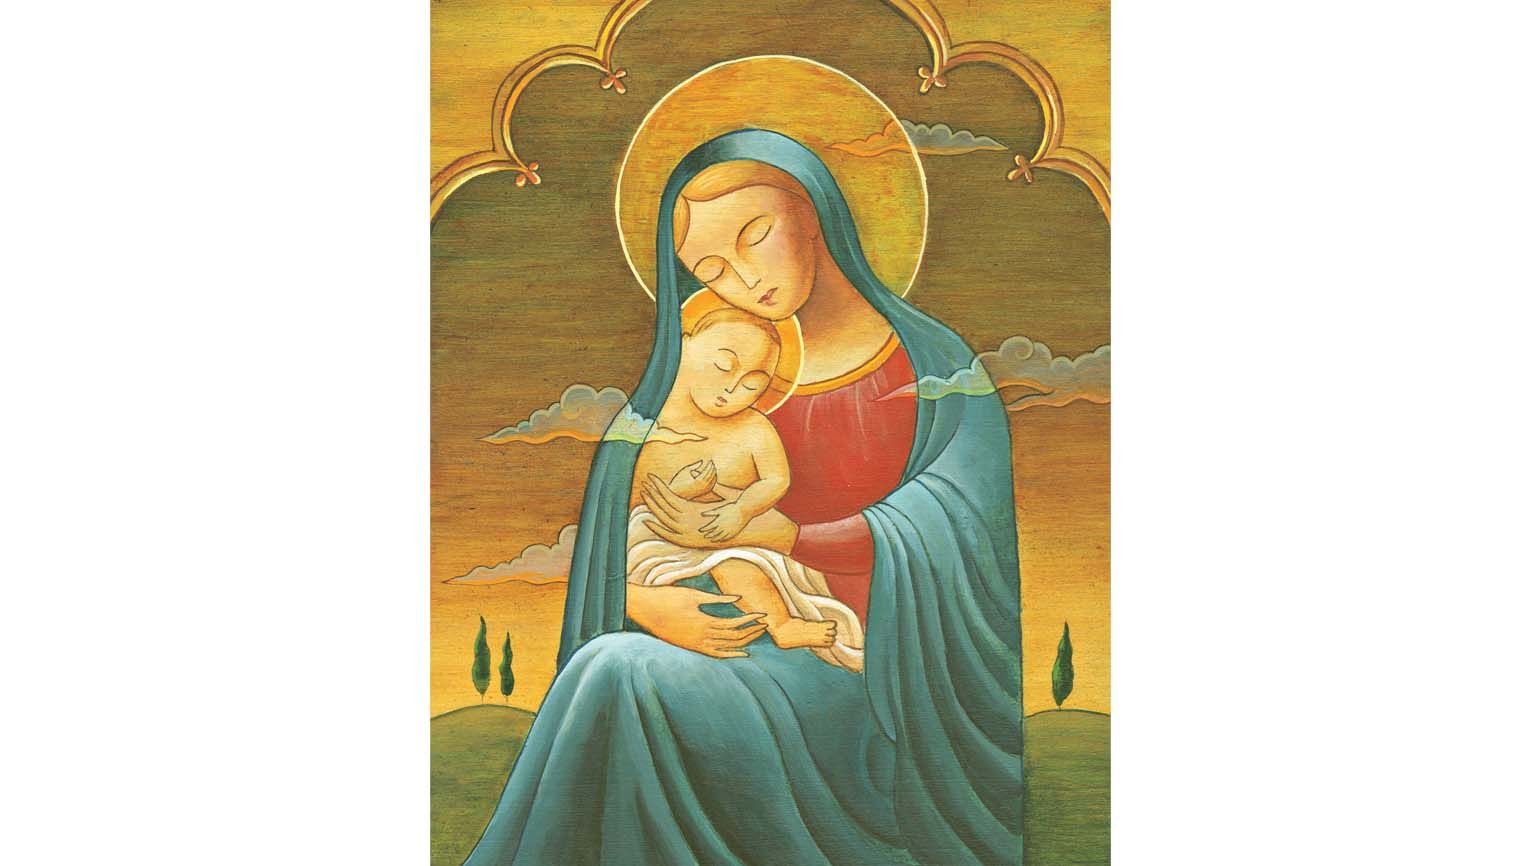 Mary and her firstborn son Jesus in a warm embrace; Illustration by Stefano Vitale